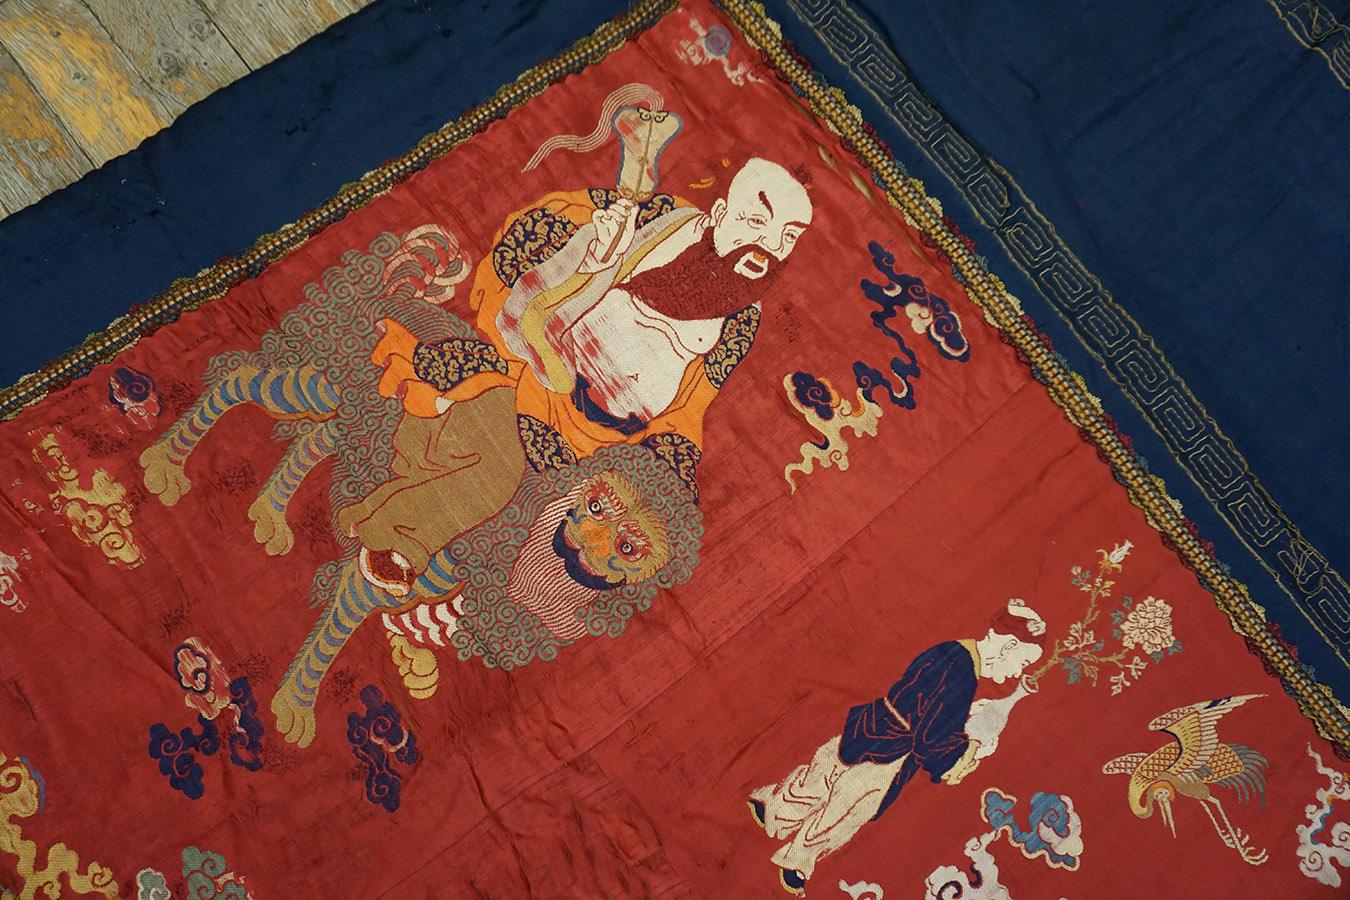 19th Century Chinese Pictorial Embroidery Textile (3' 6'' x 11' 4'' - 107 x 345) For Sale 3